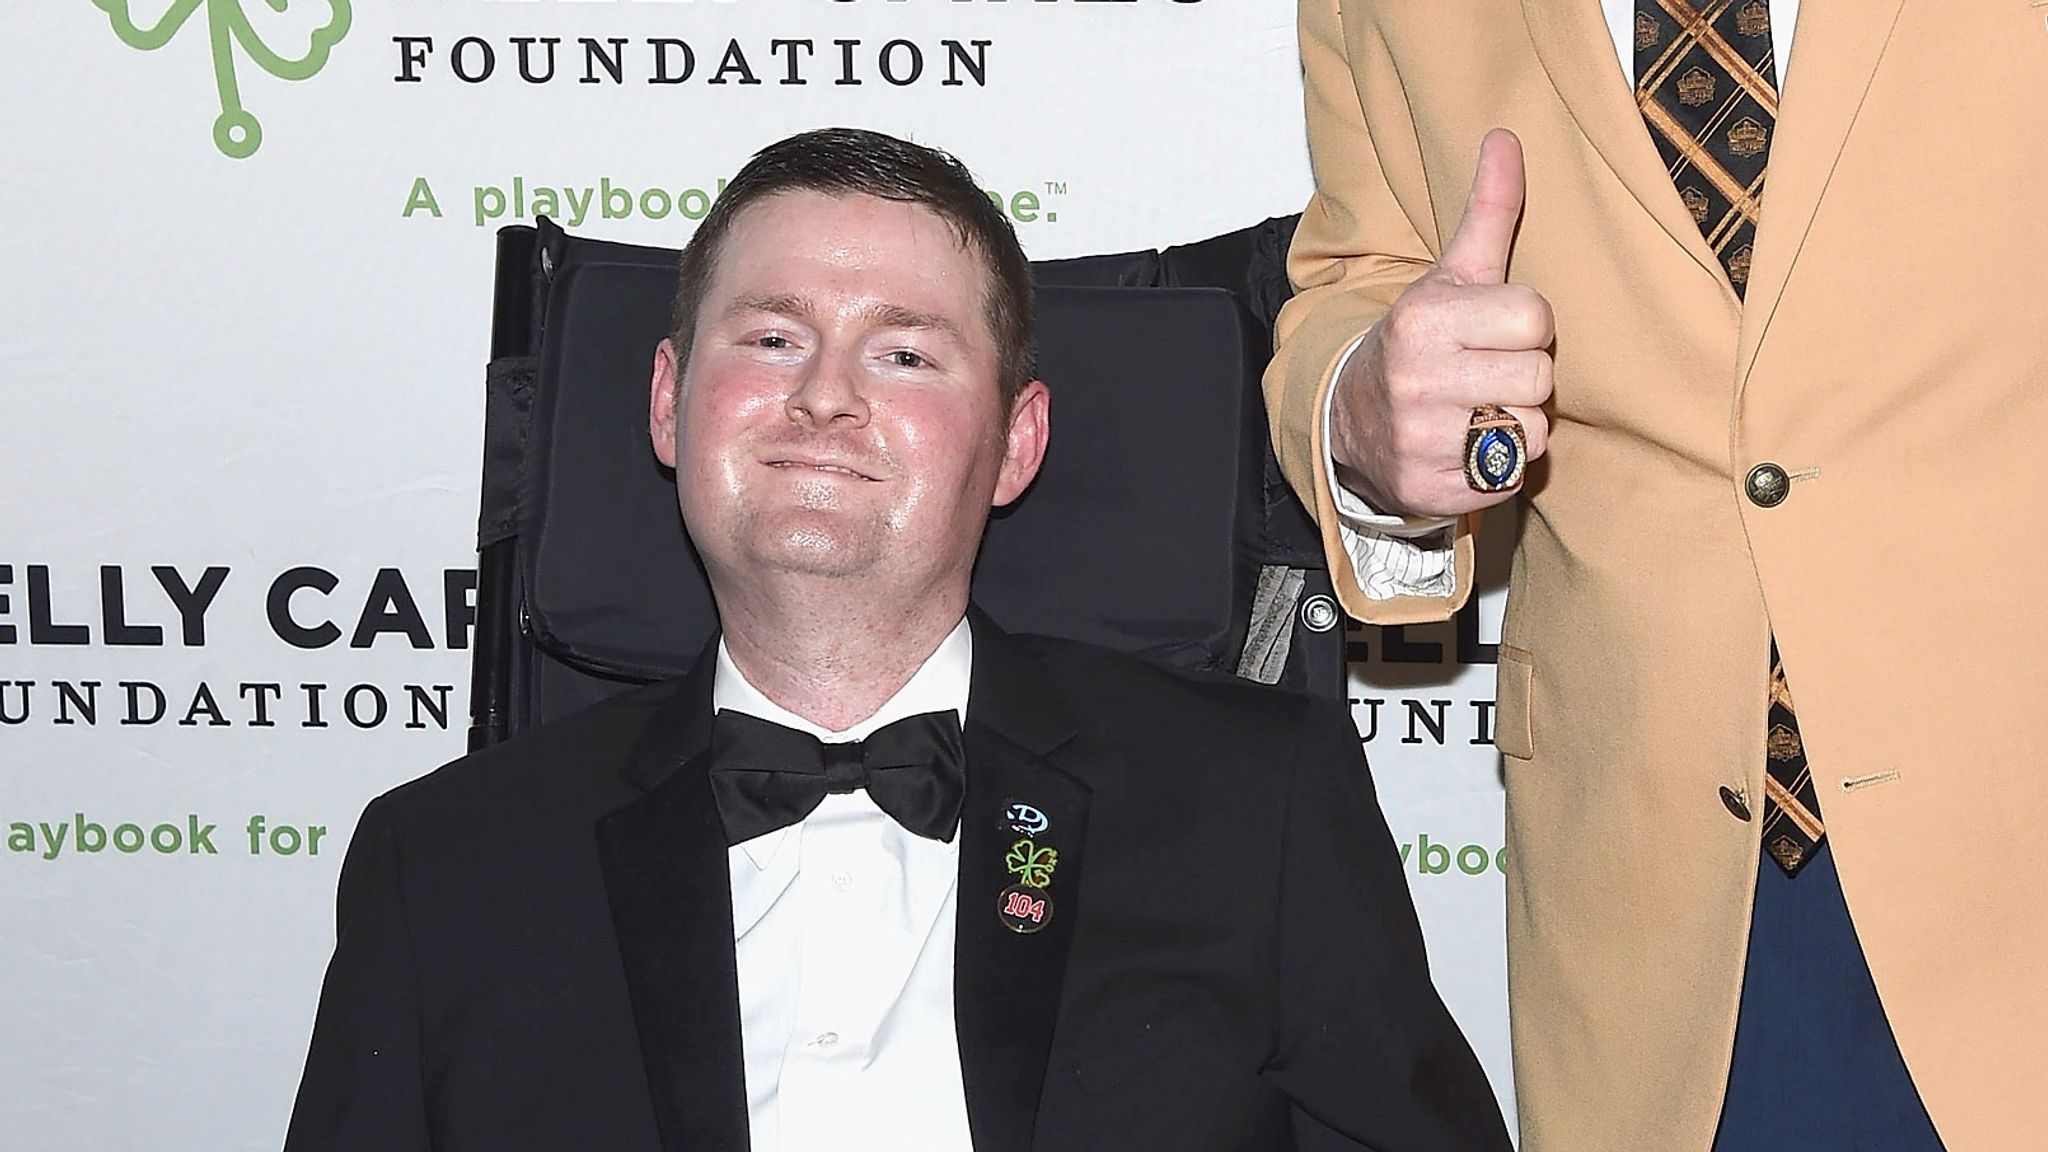 Ice bucket challenge co-founder Pat Quinn dies of ALS at age 37 | US News |  Sky News